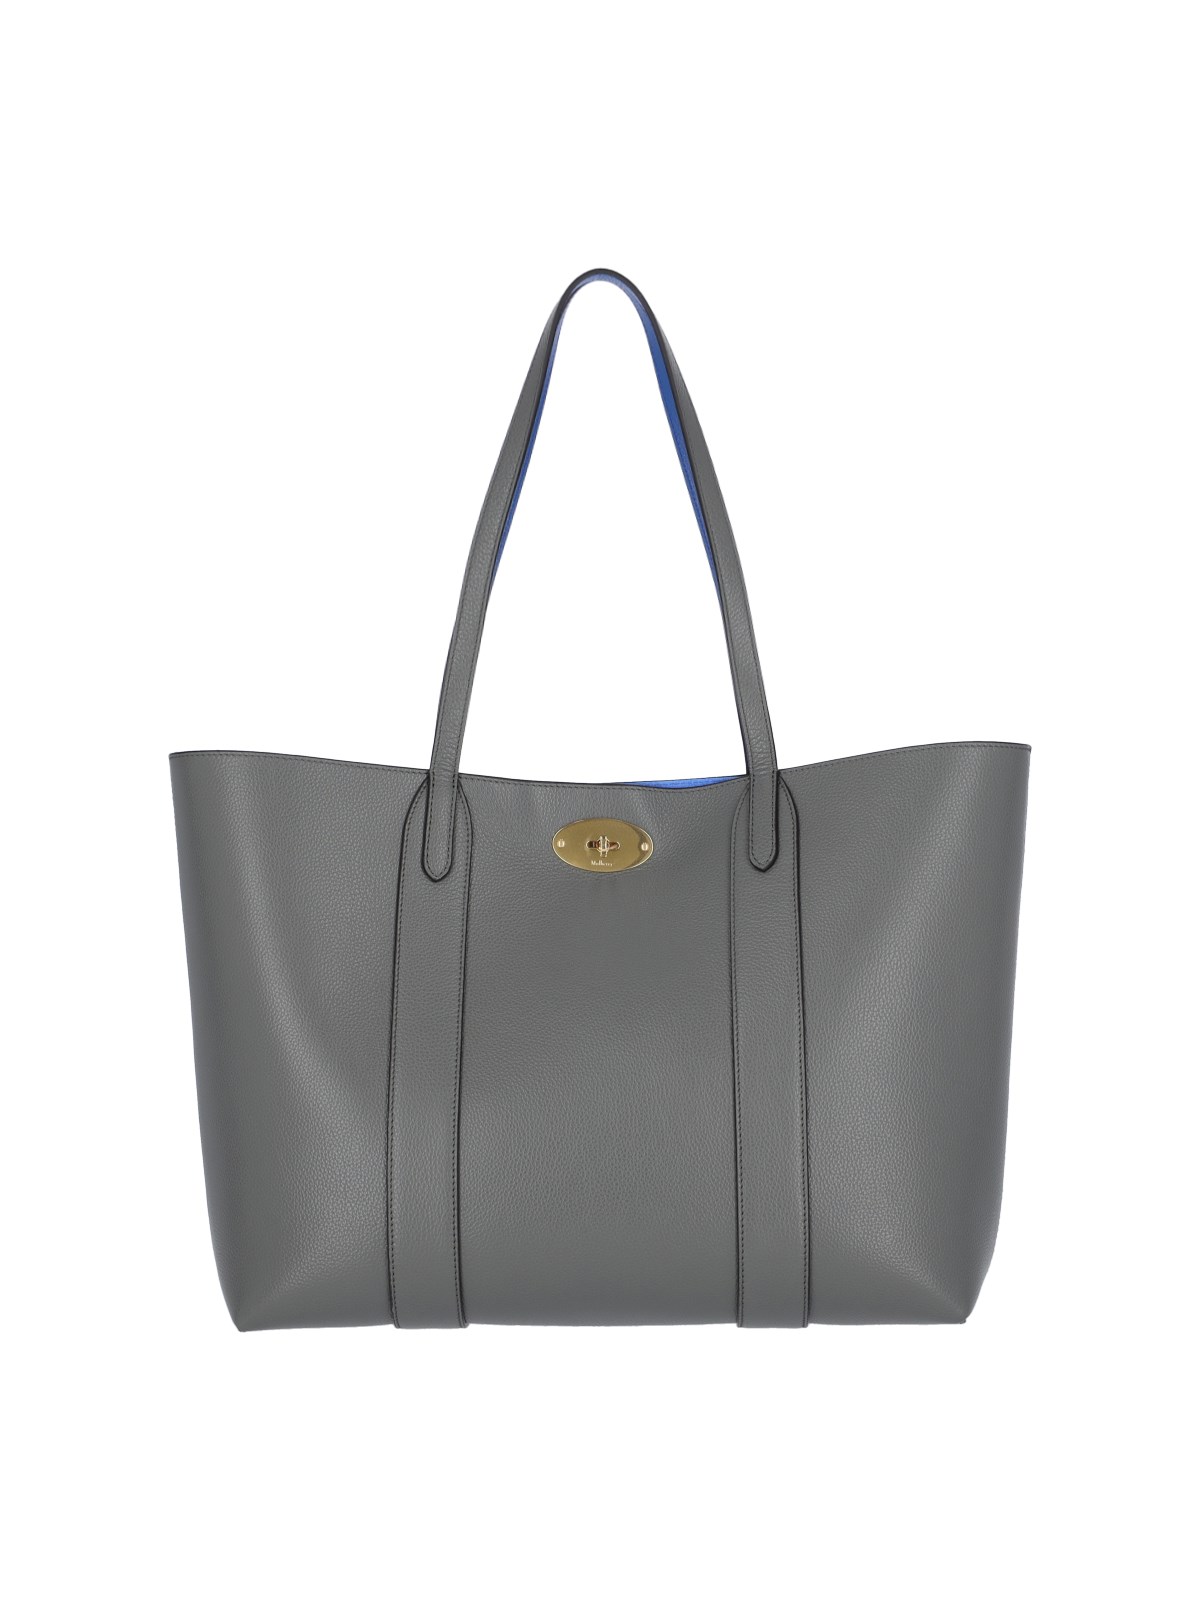 Mulberry "bayswater" Tote Bag In Gray